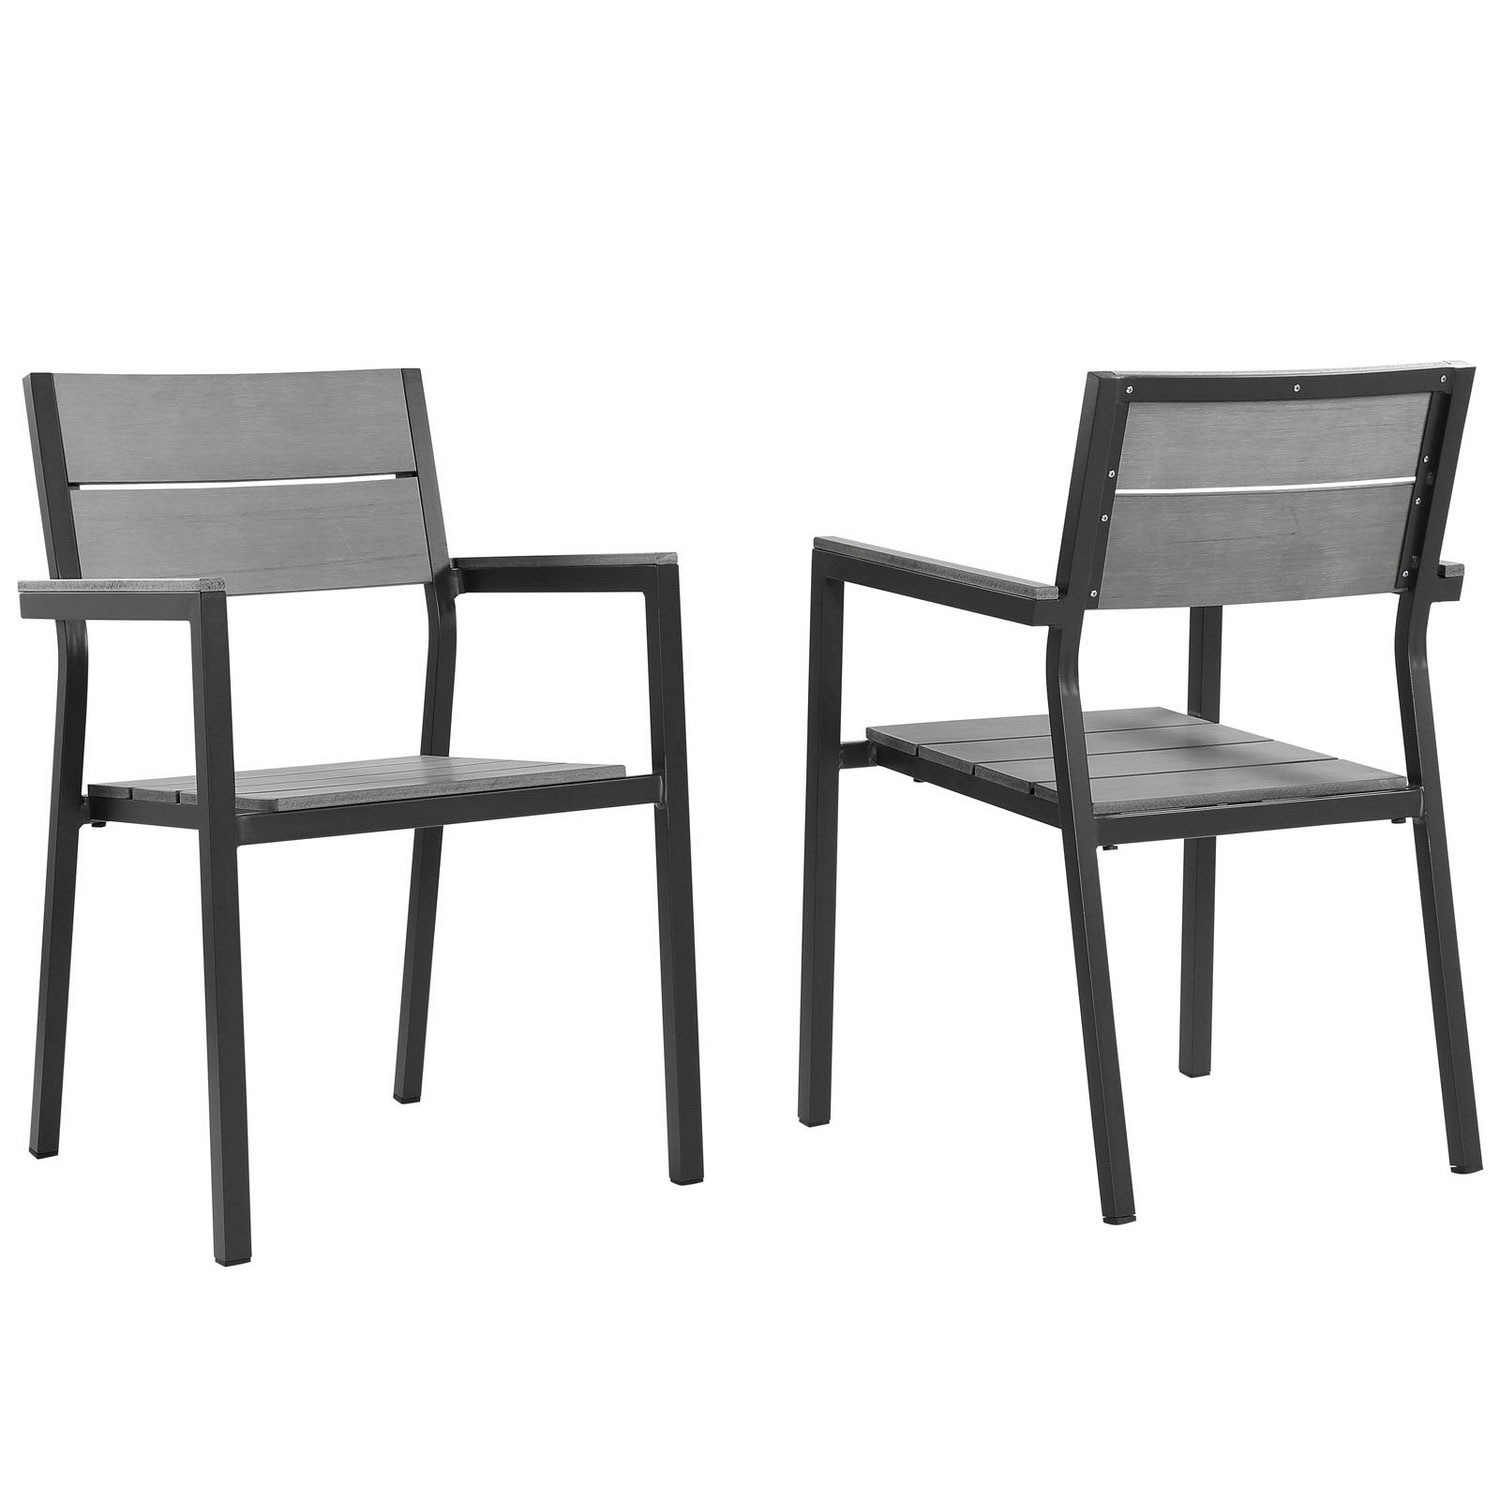 Modway Maine Dining Armchair Outdoor Patio Set of 2 - Brown/Gray